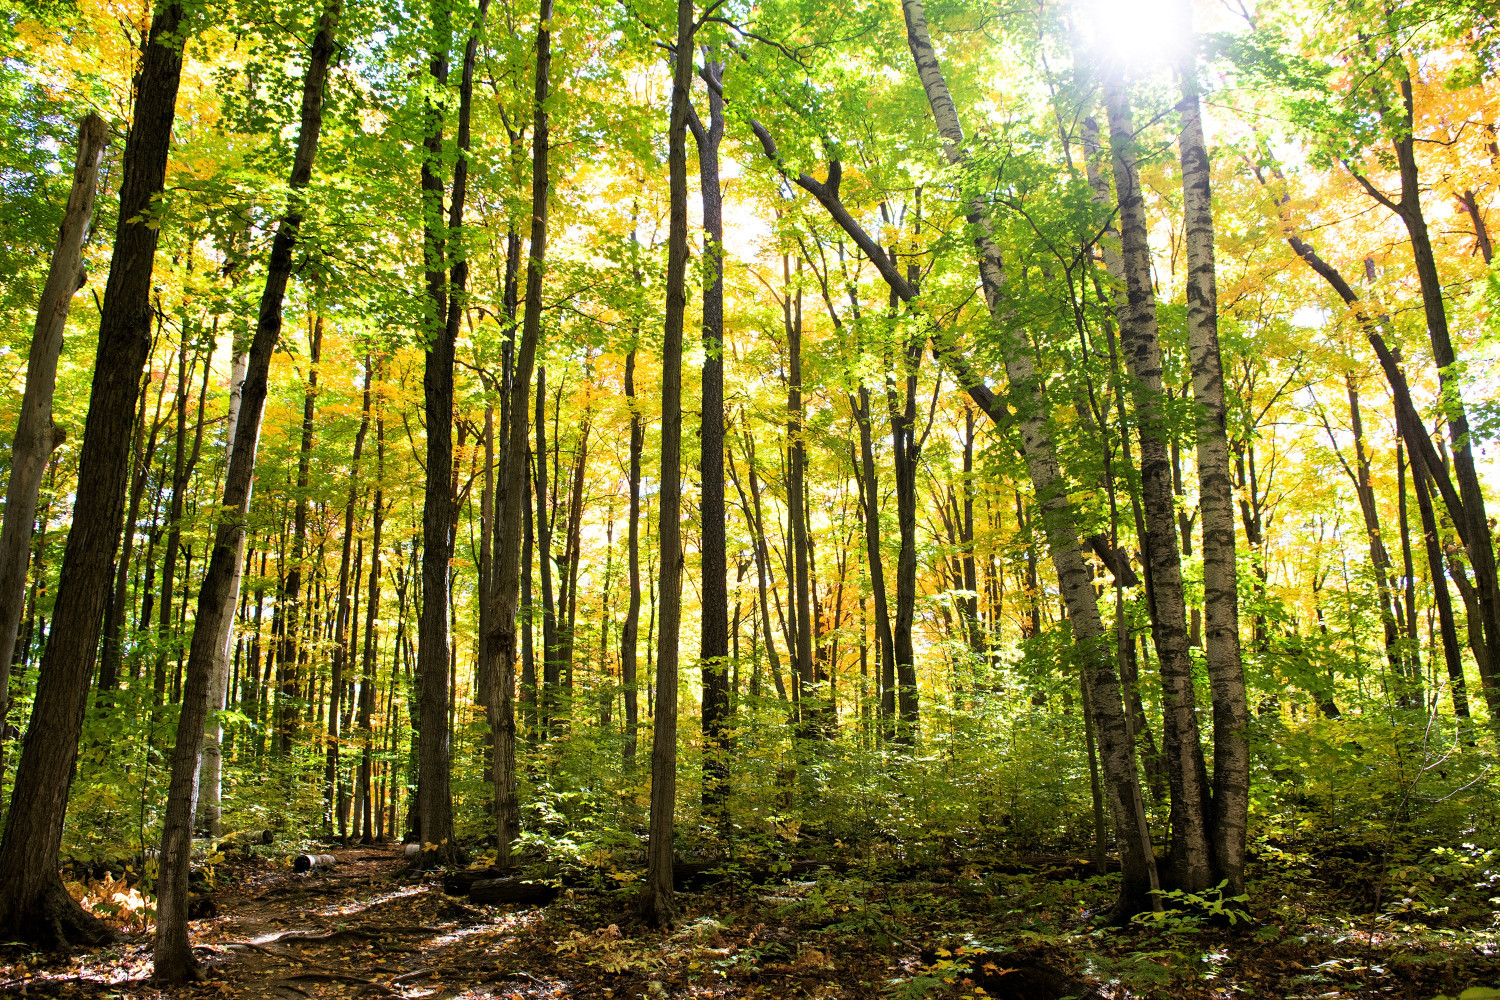 St. Catharines wants to plant 100K trees in 10 years—it’s just one way to combat climate change